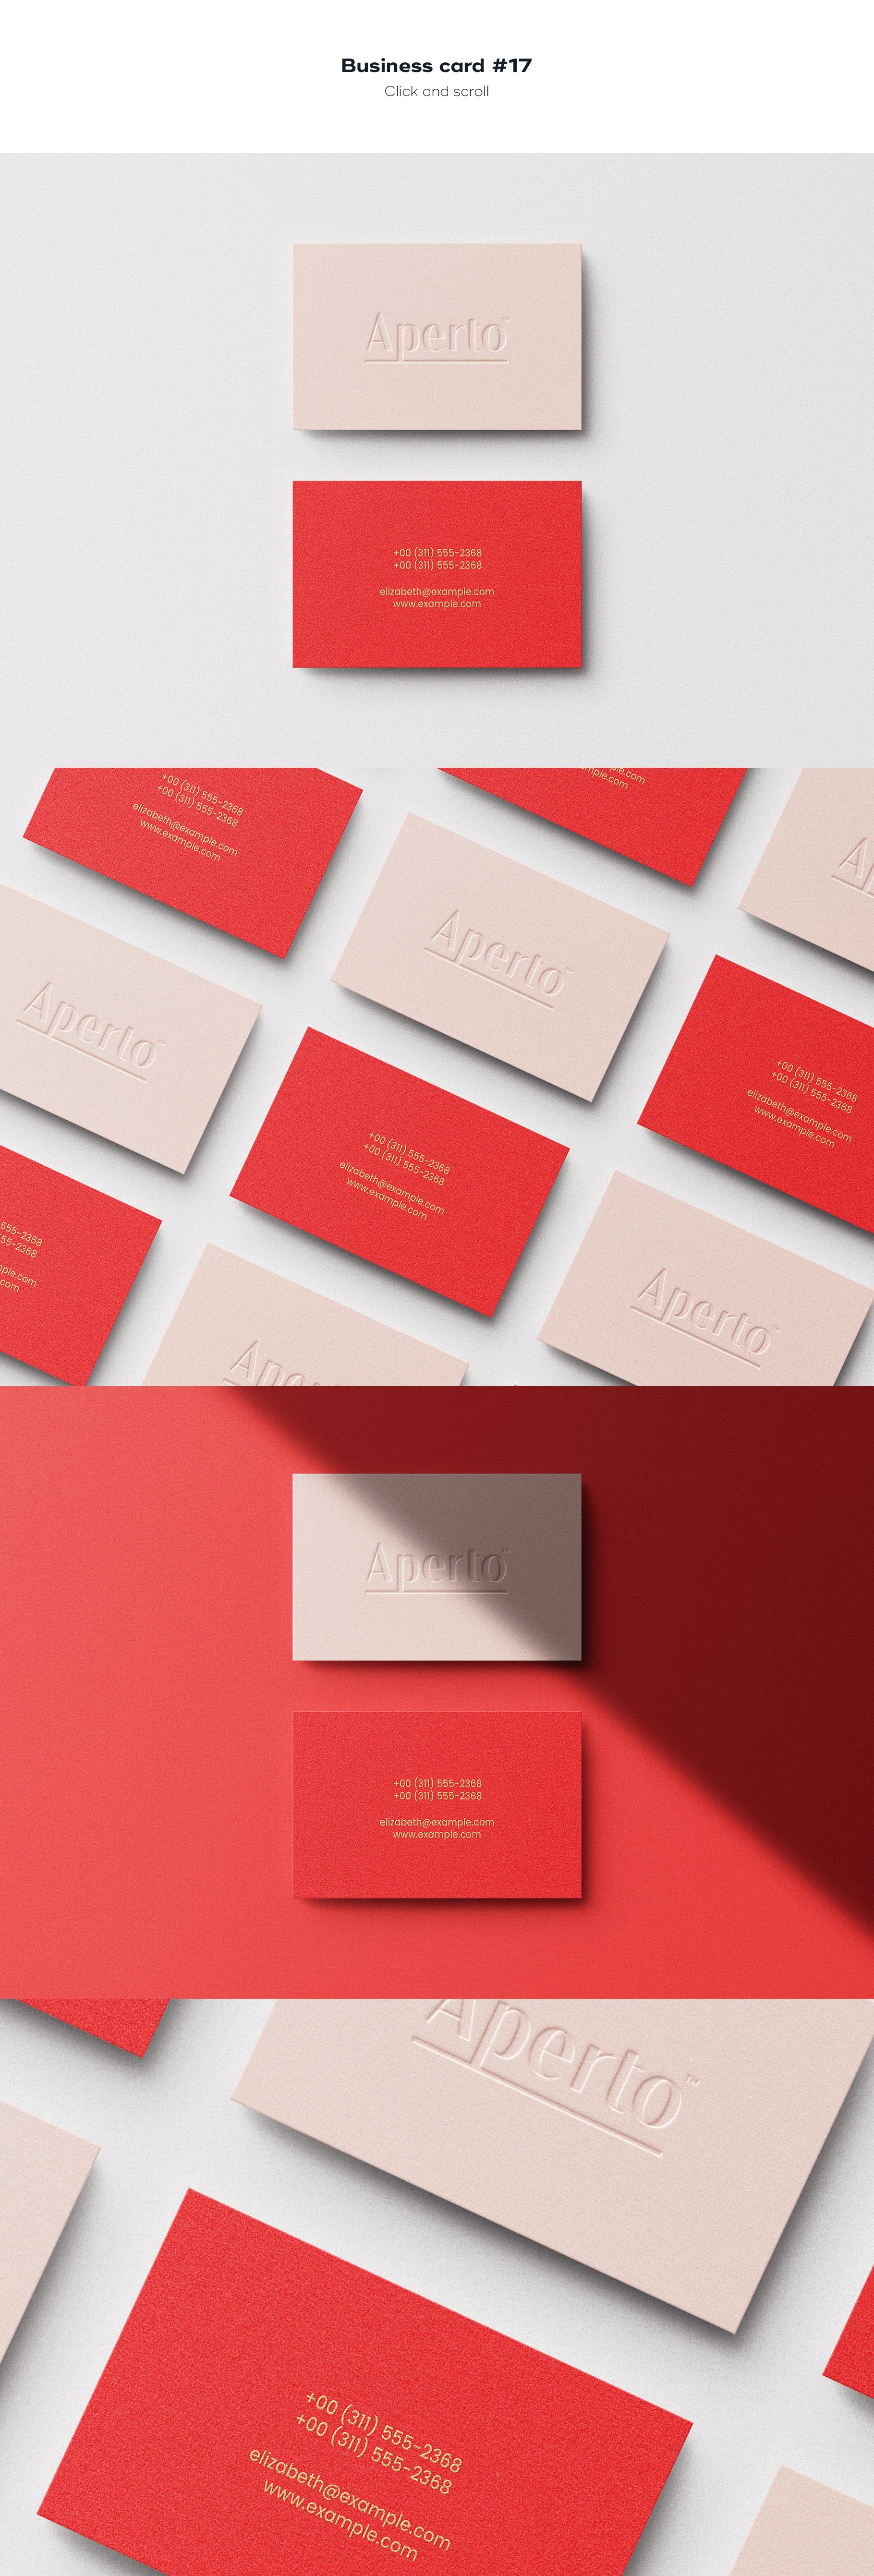 business card 17 128